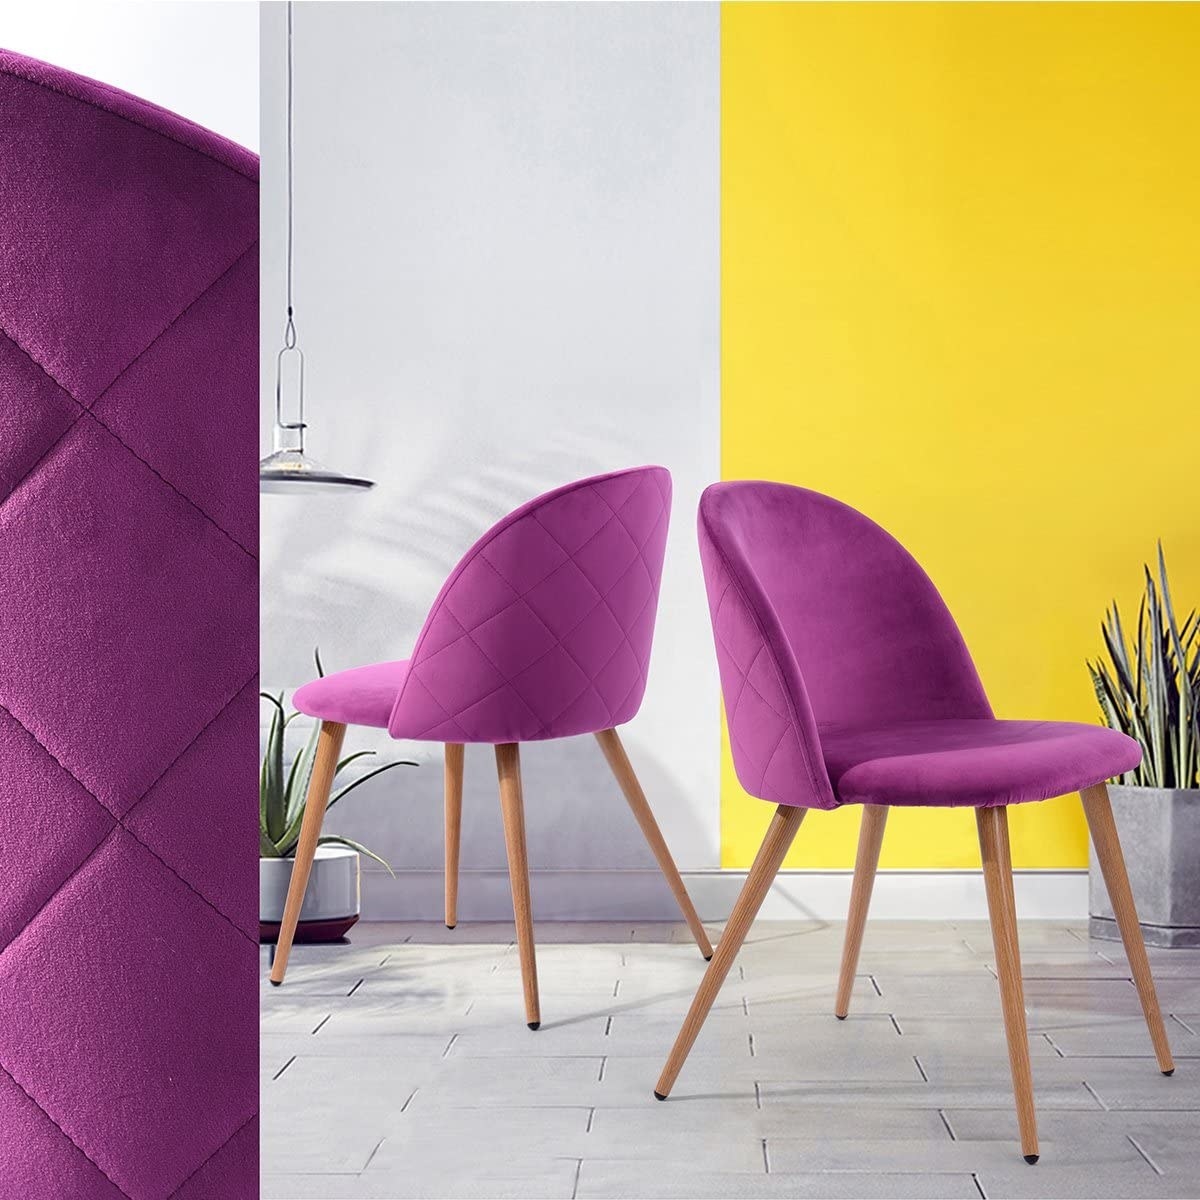 The quilted velvet chairs in purple